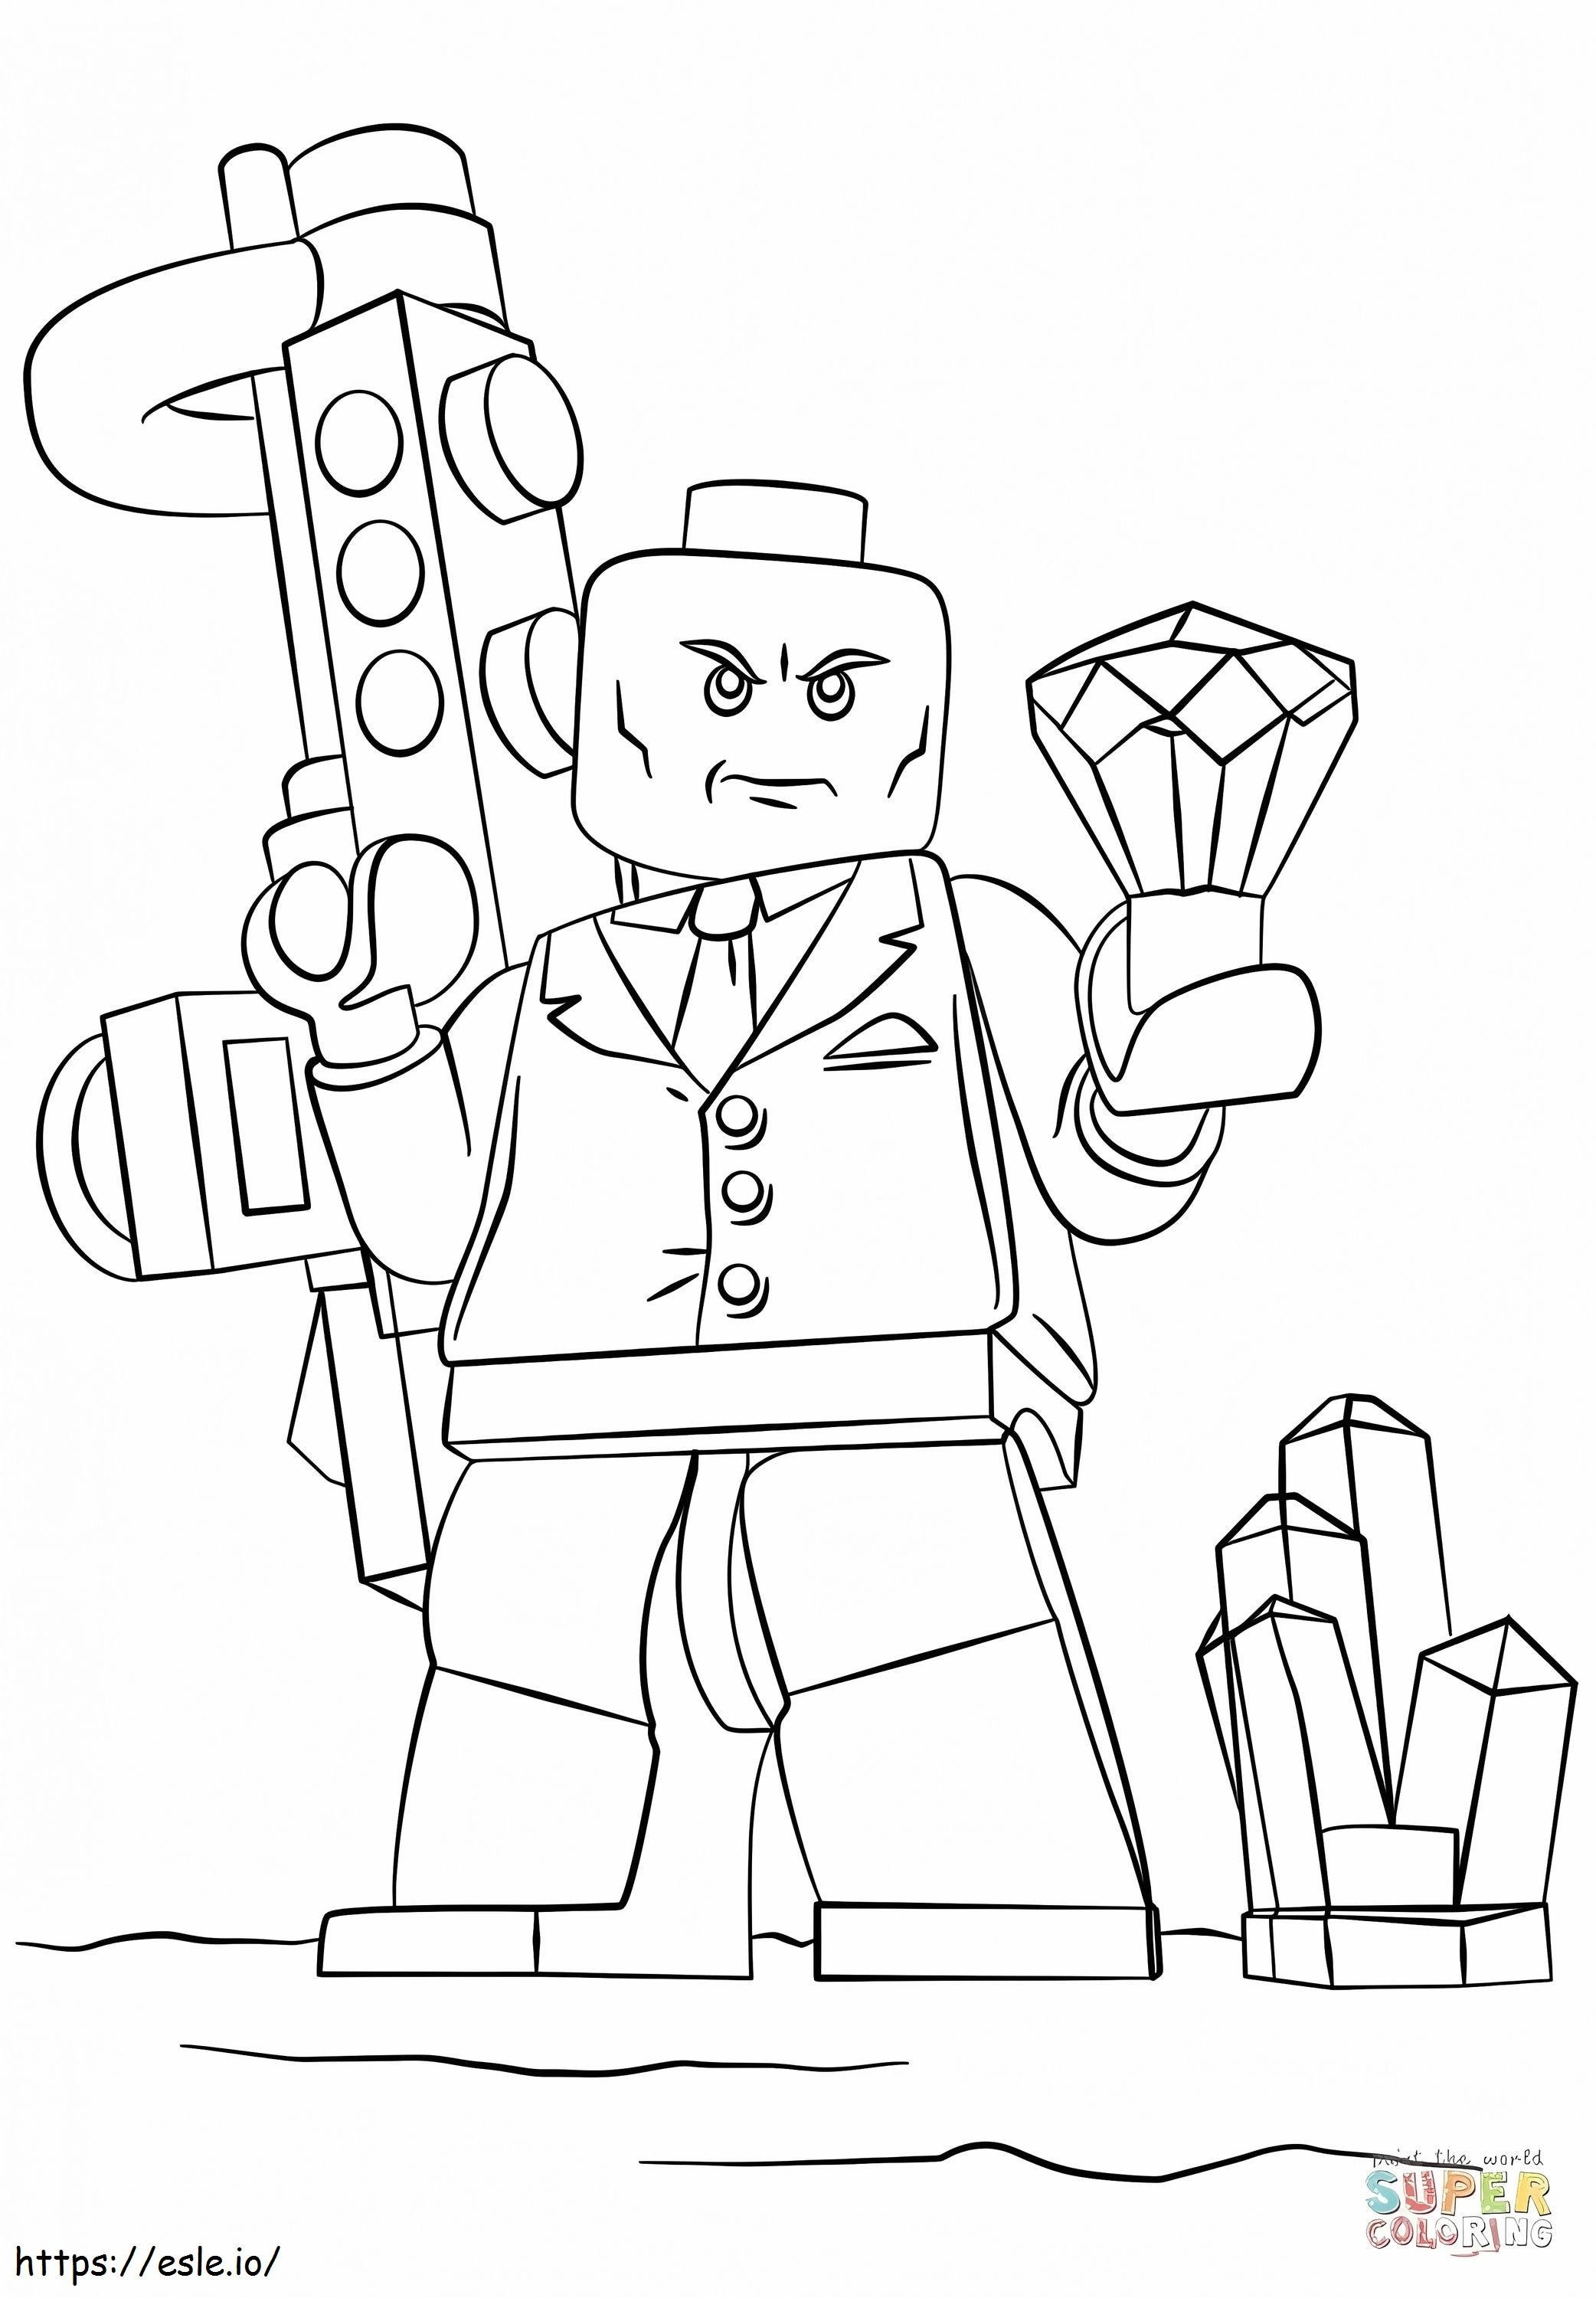 1562547478_I Read The Lex Luthor A4 coloring page